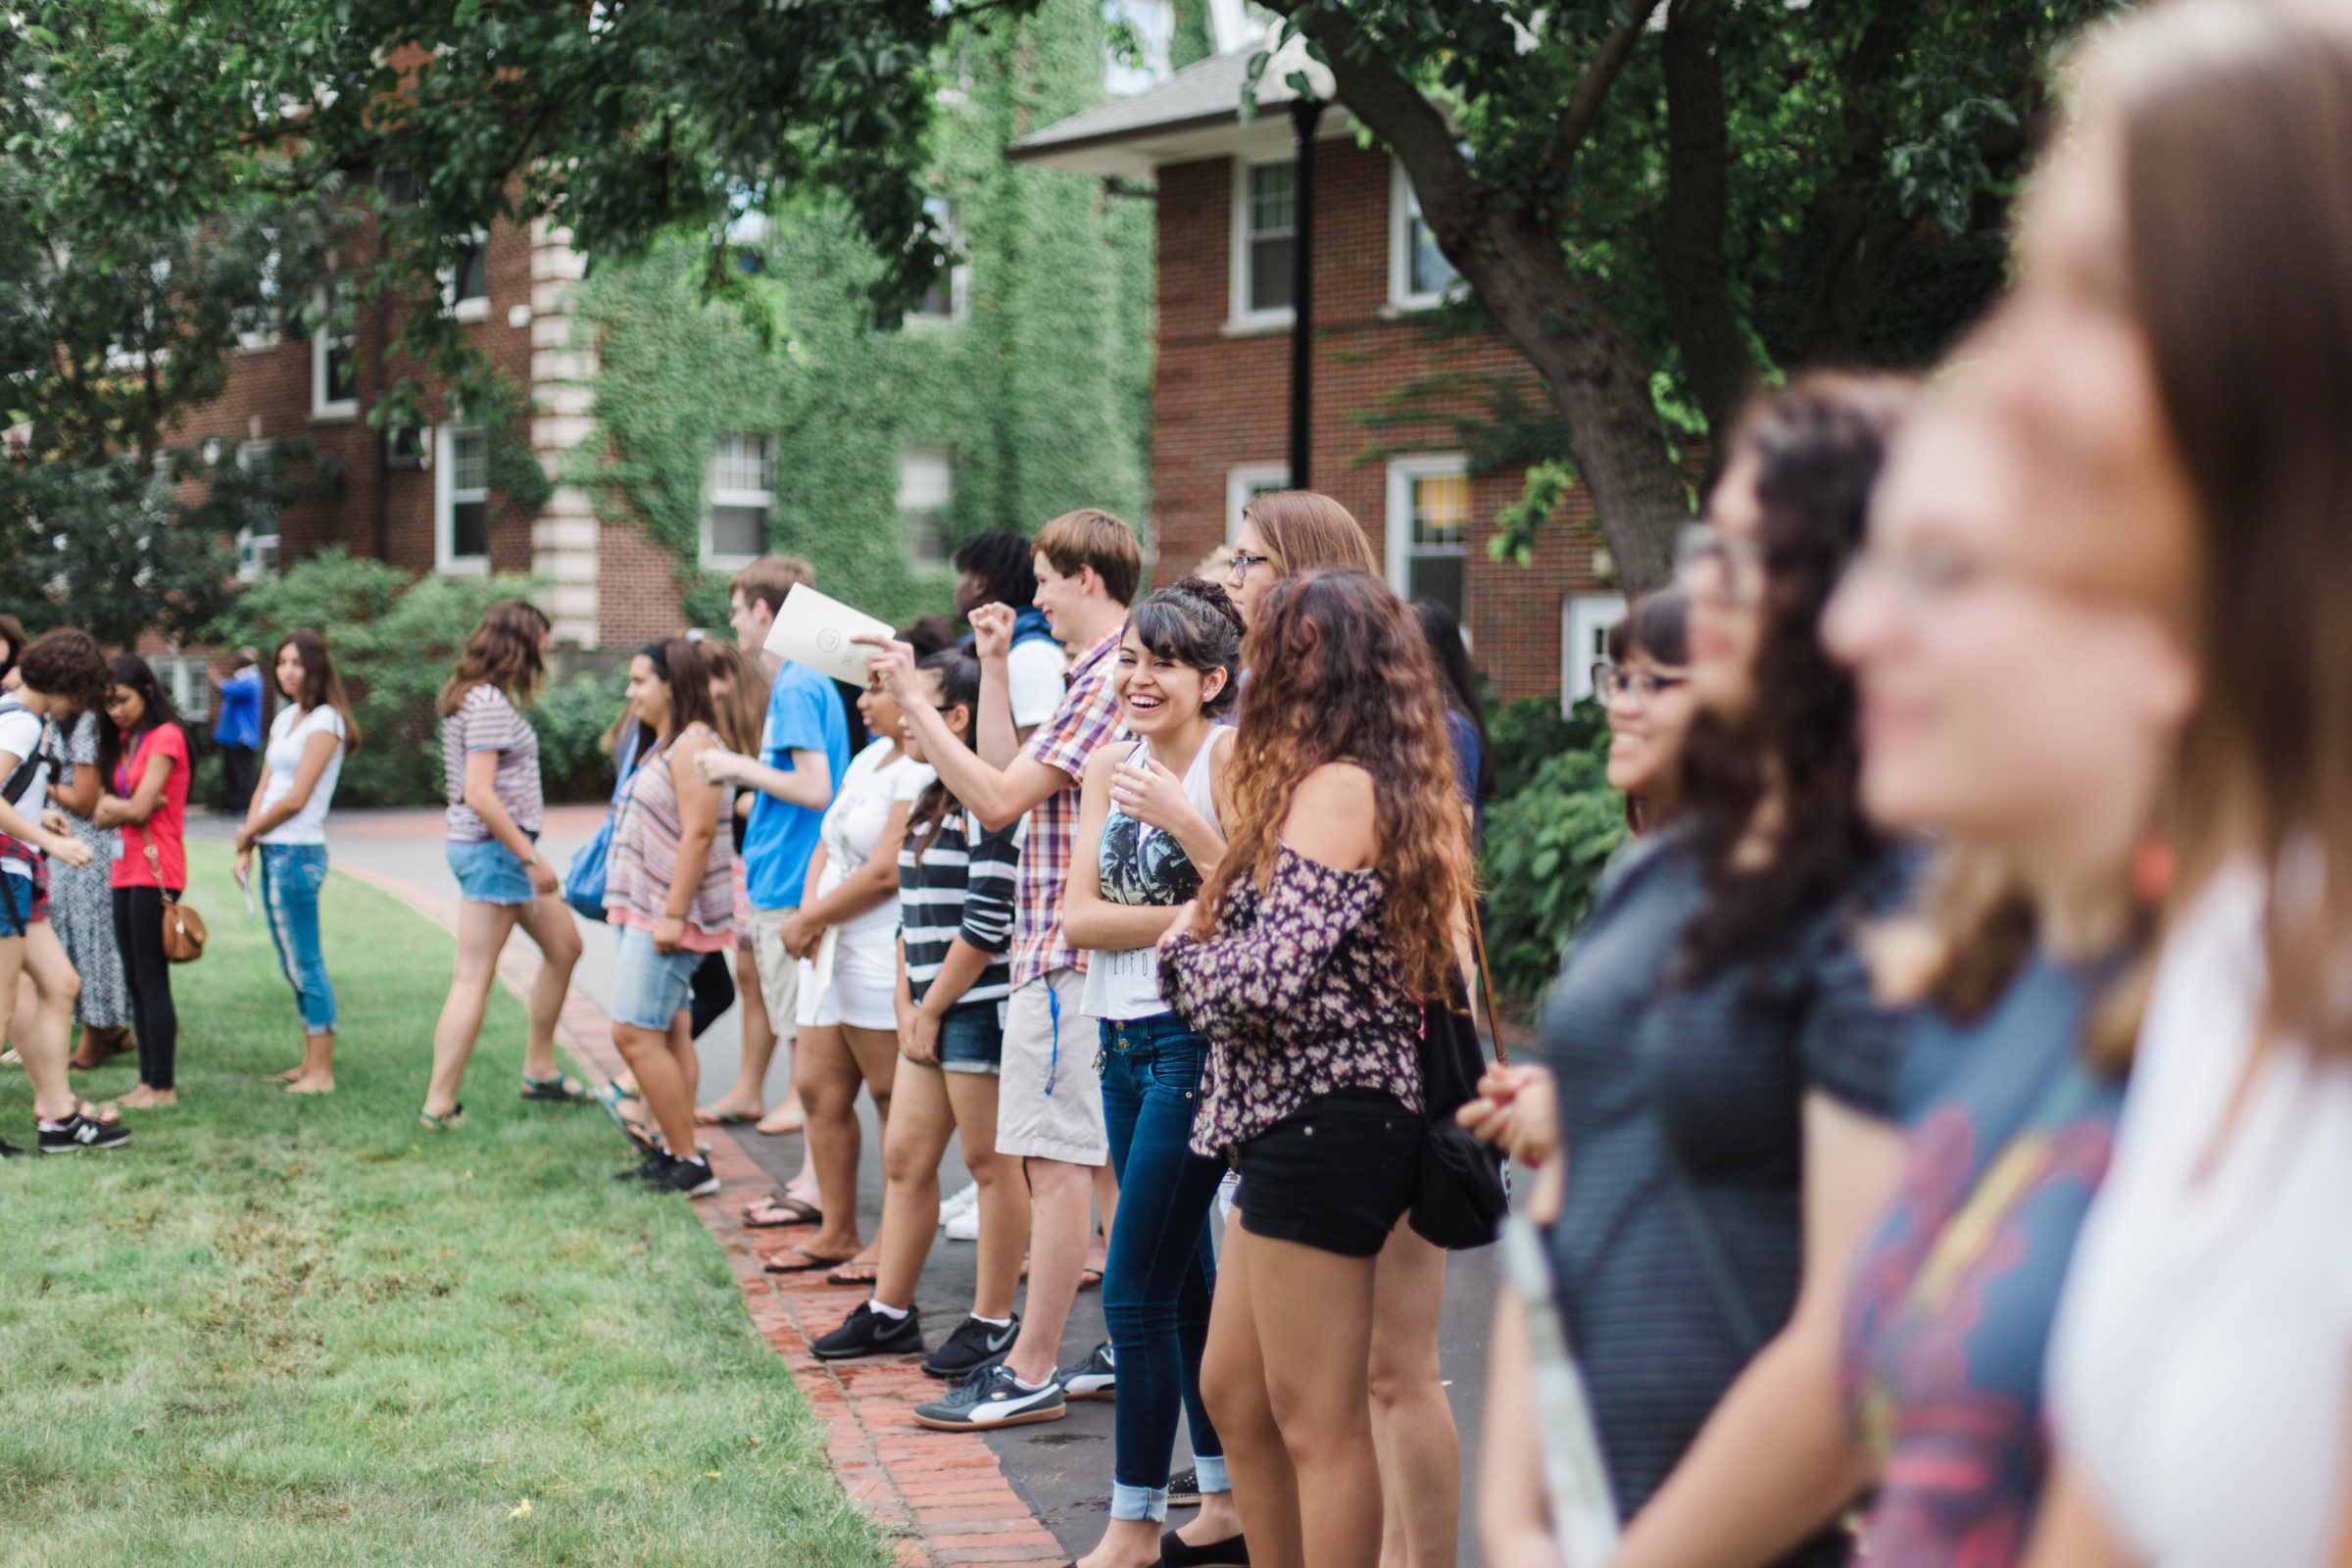 Students line up on the grass during orientation group activities.